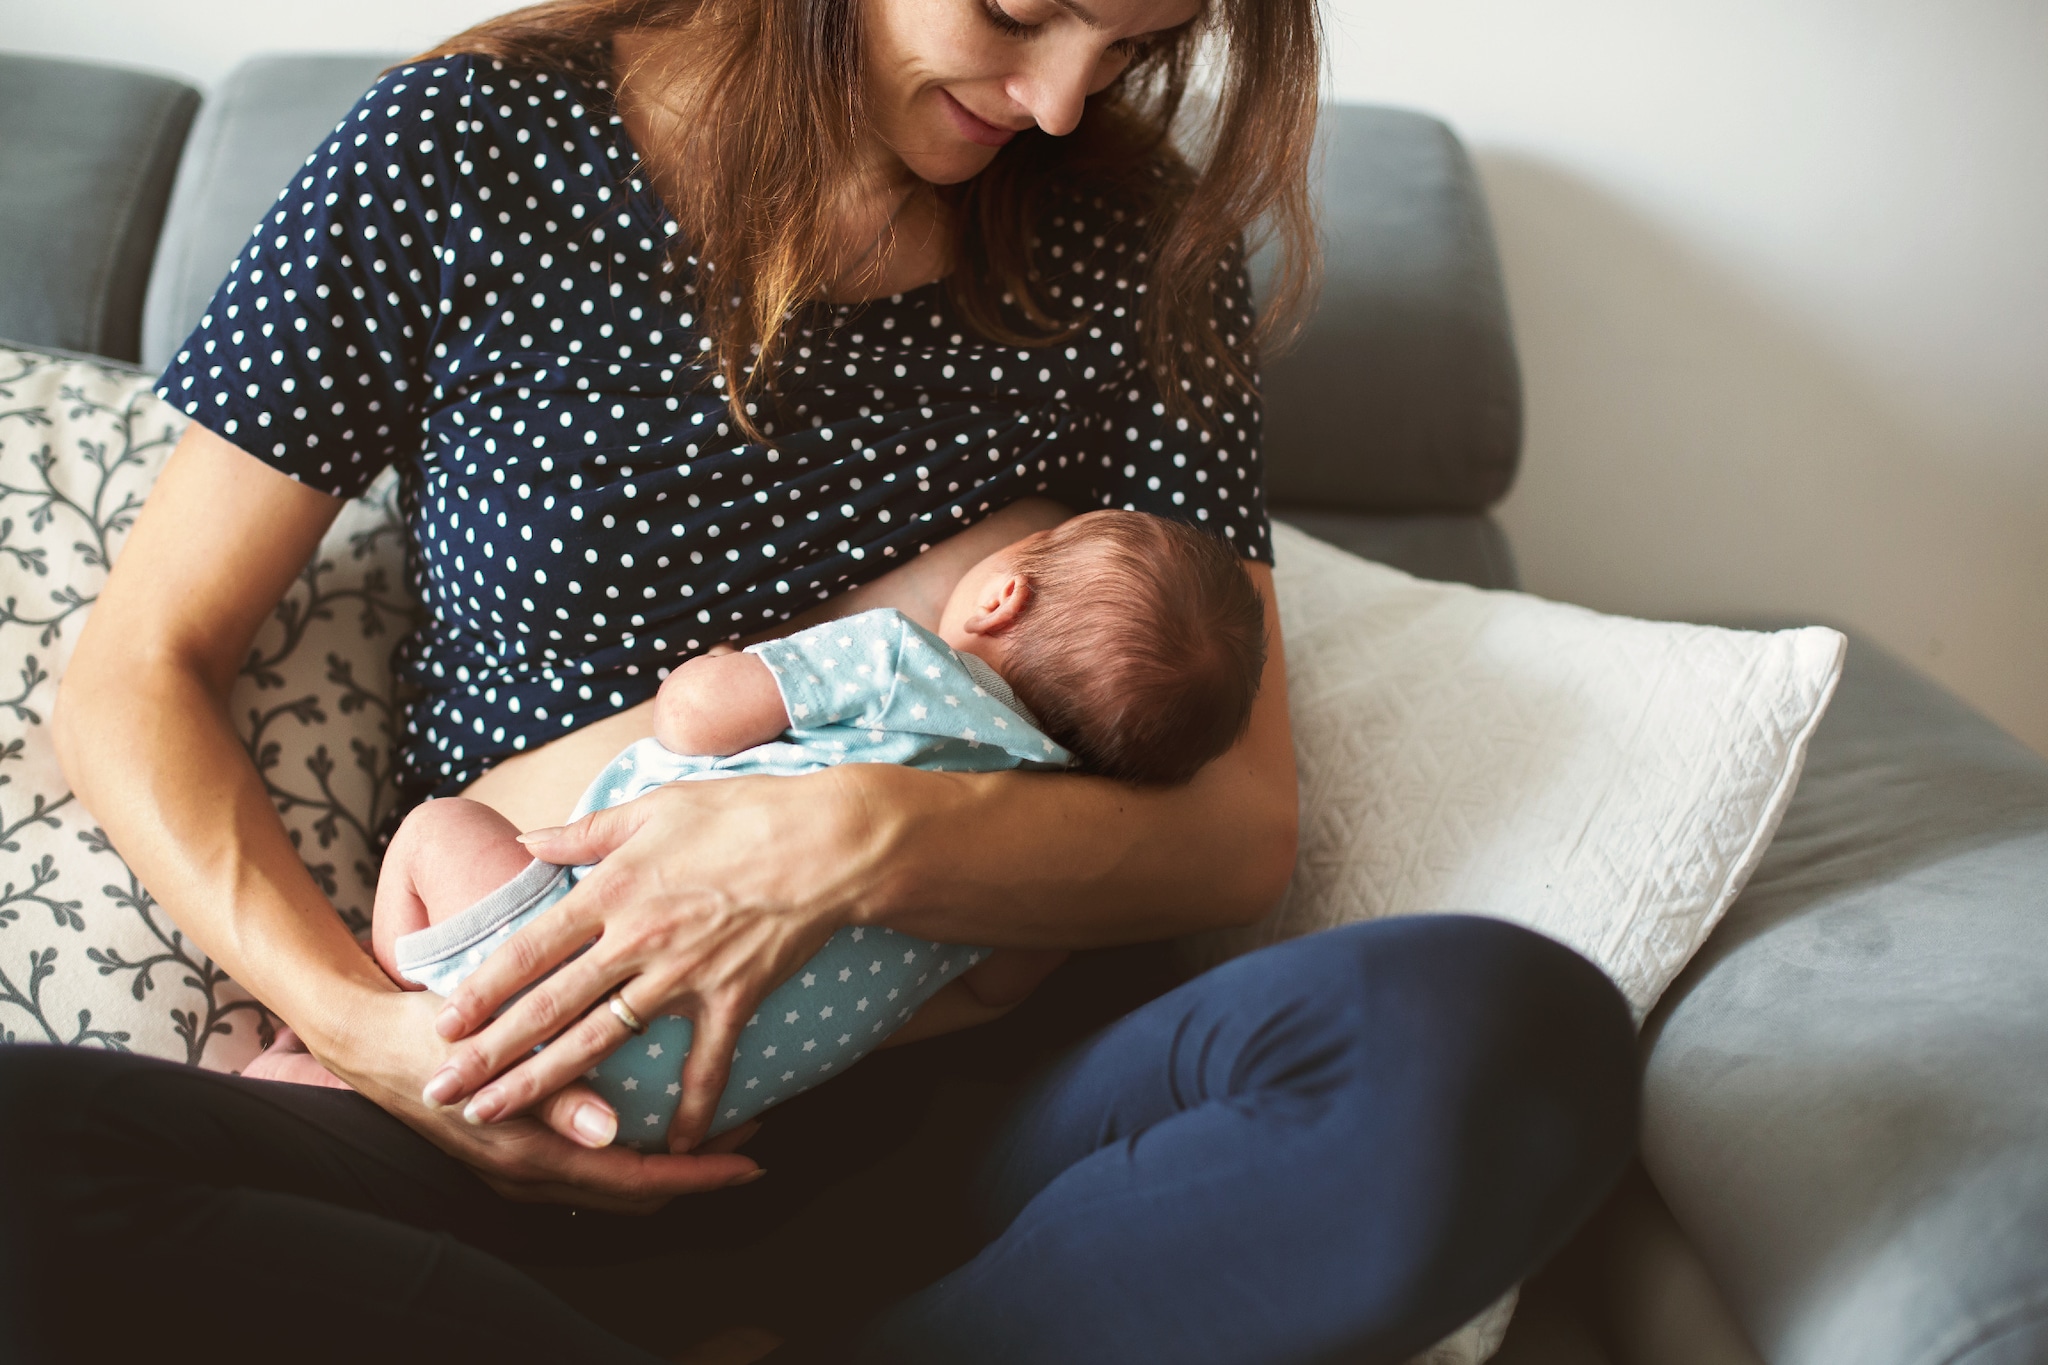 https://www.cdc.gov/breastfeeding/images/social-media/young-mother-breastfeeds-her-baby-holding-him-in-her-arms.jpg?_=44429